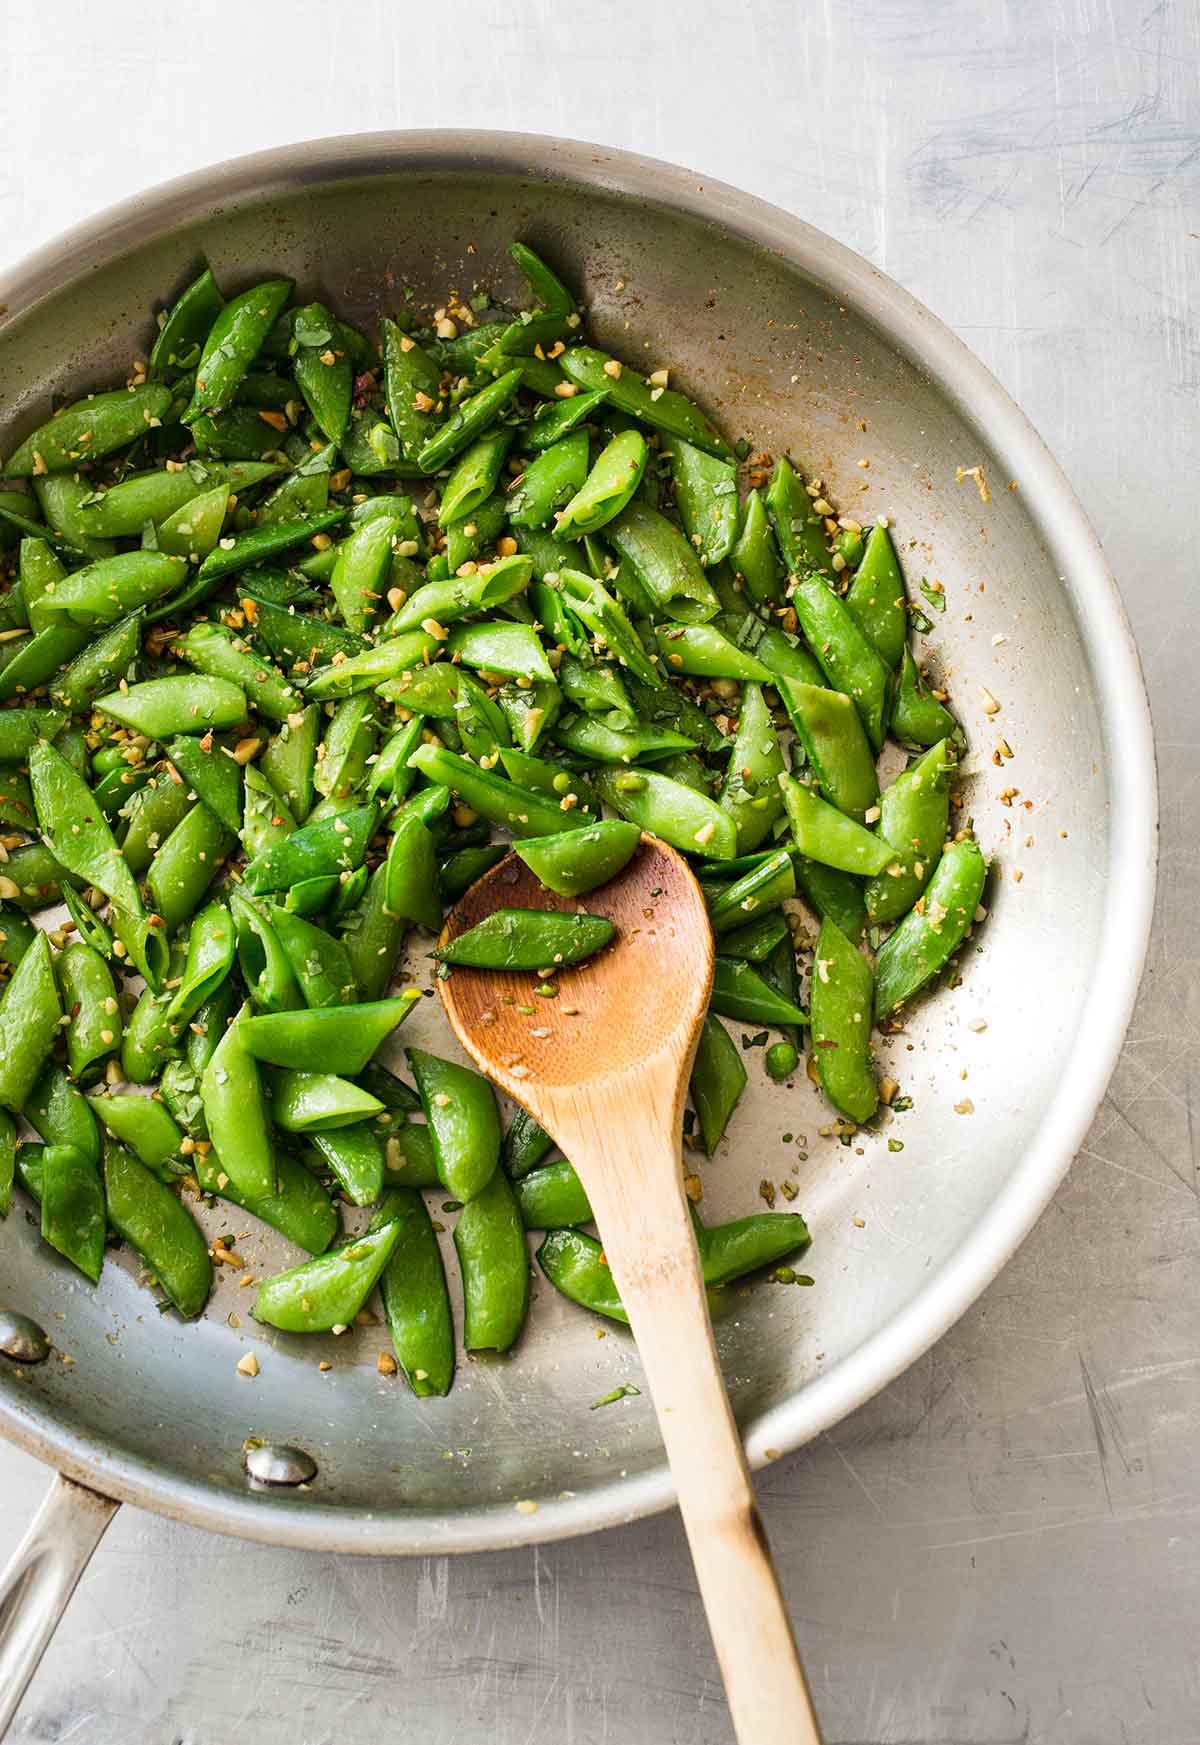 A metal wok filled with halved snap peas, sprinkled with fennel, pine nuts, and lemon zest, with a wooden spoon.